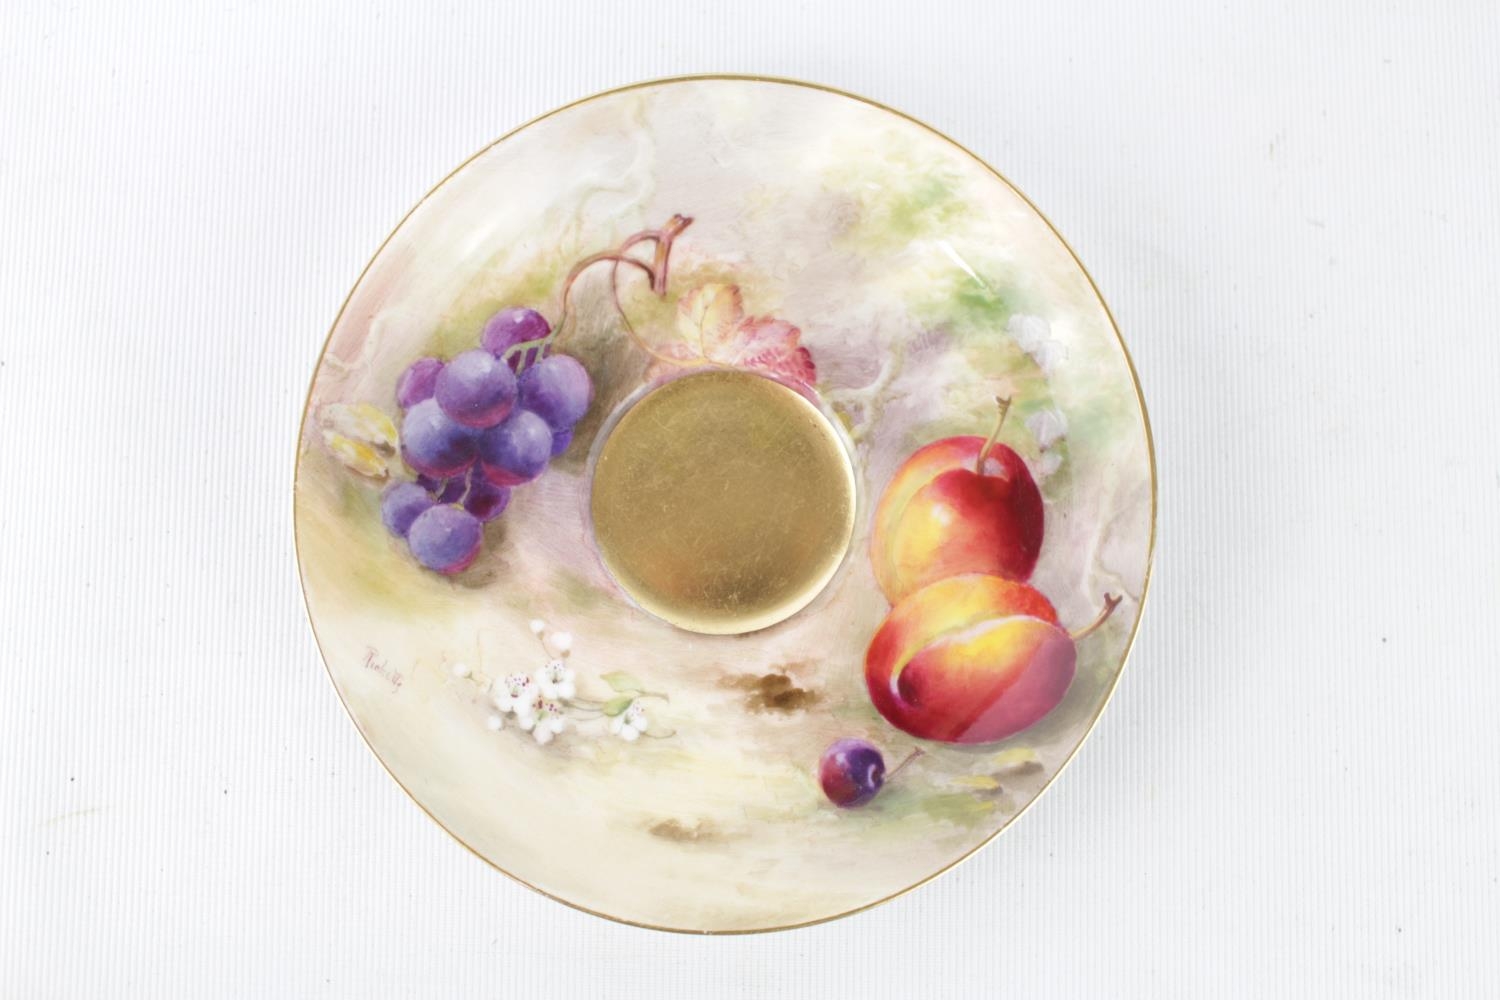 Royal Worcester Fruit decorated Cup and Saucer with signatures for A G Moseley dated 1926 and Saucer - Image 3 of 5